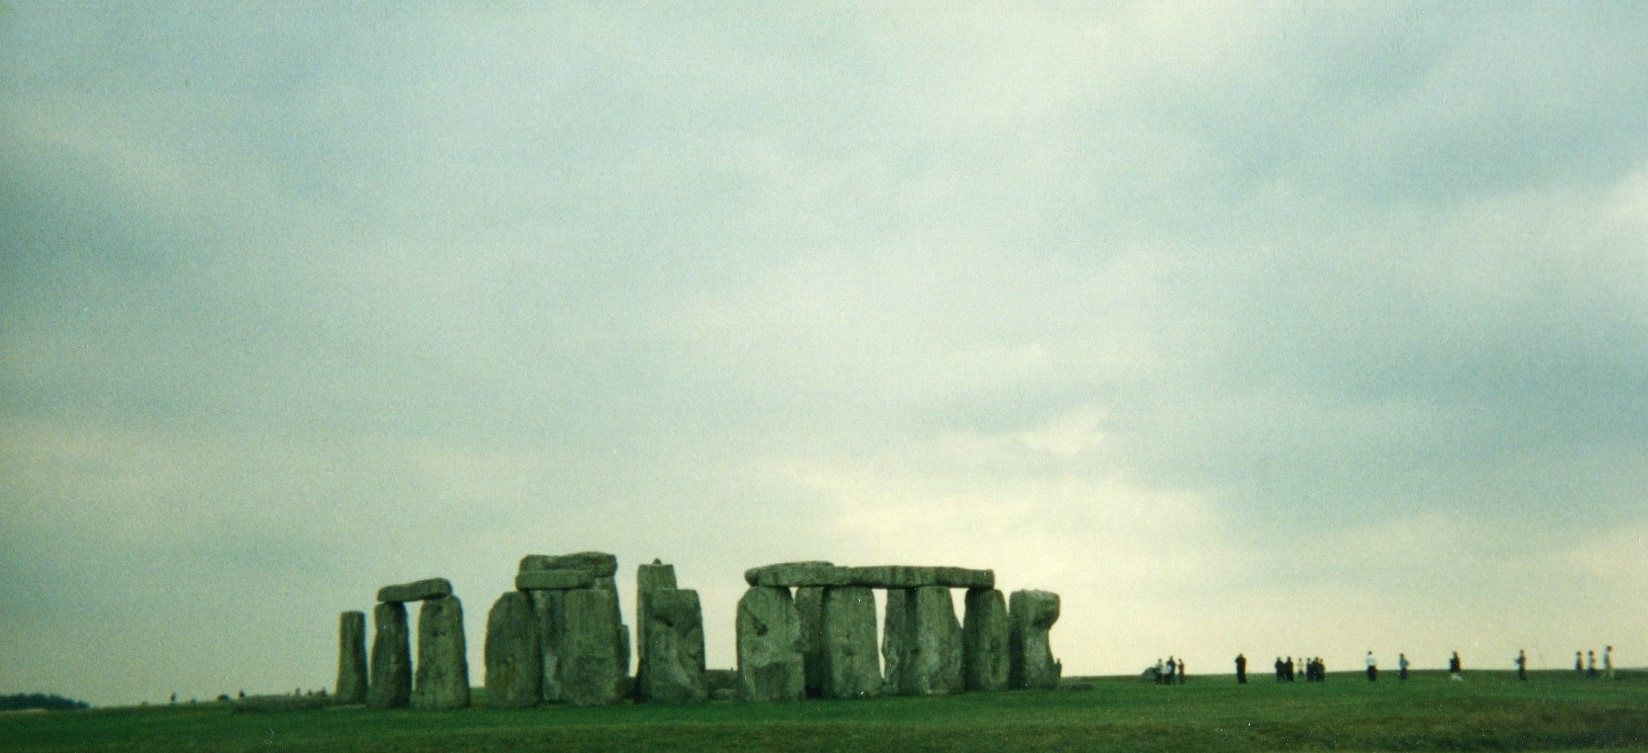 Stonehenge - mysterious, magical